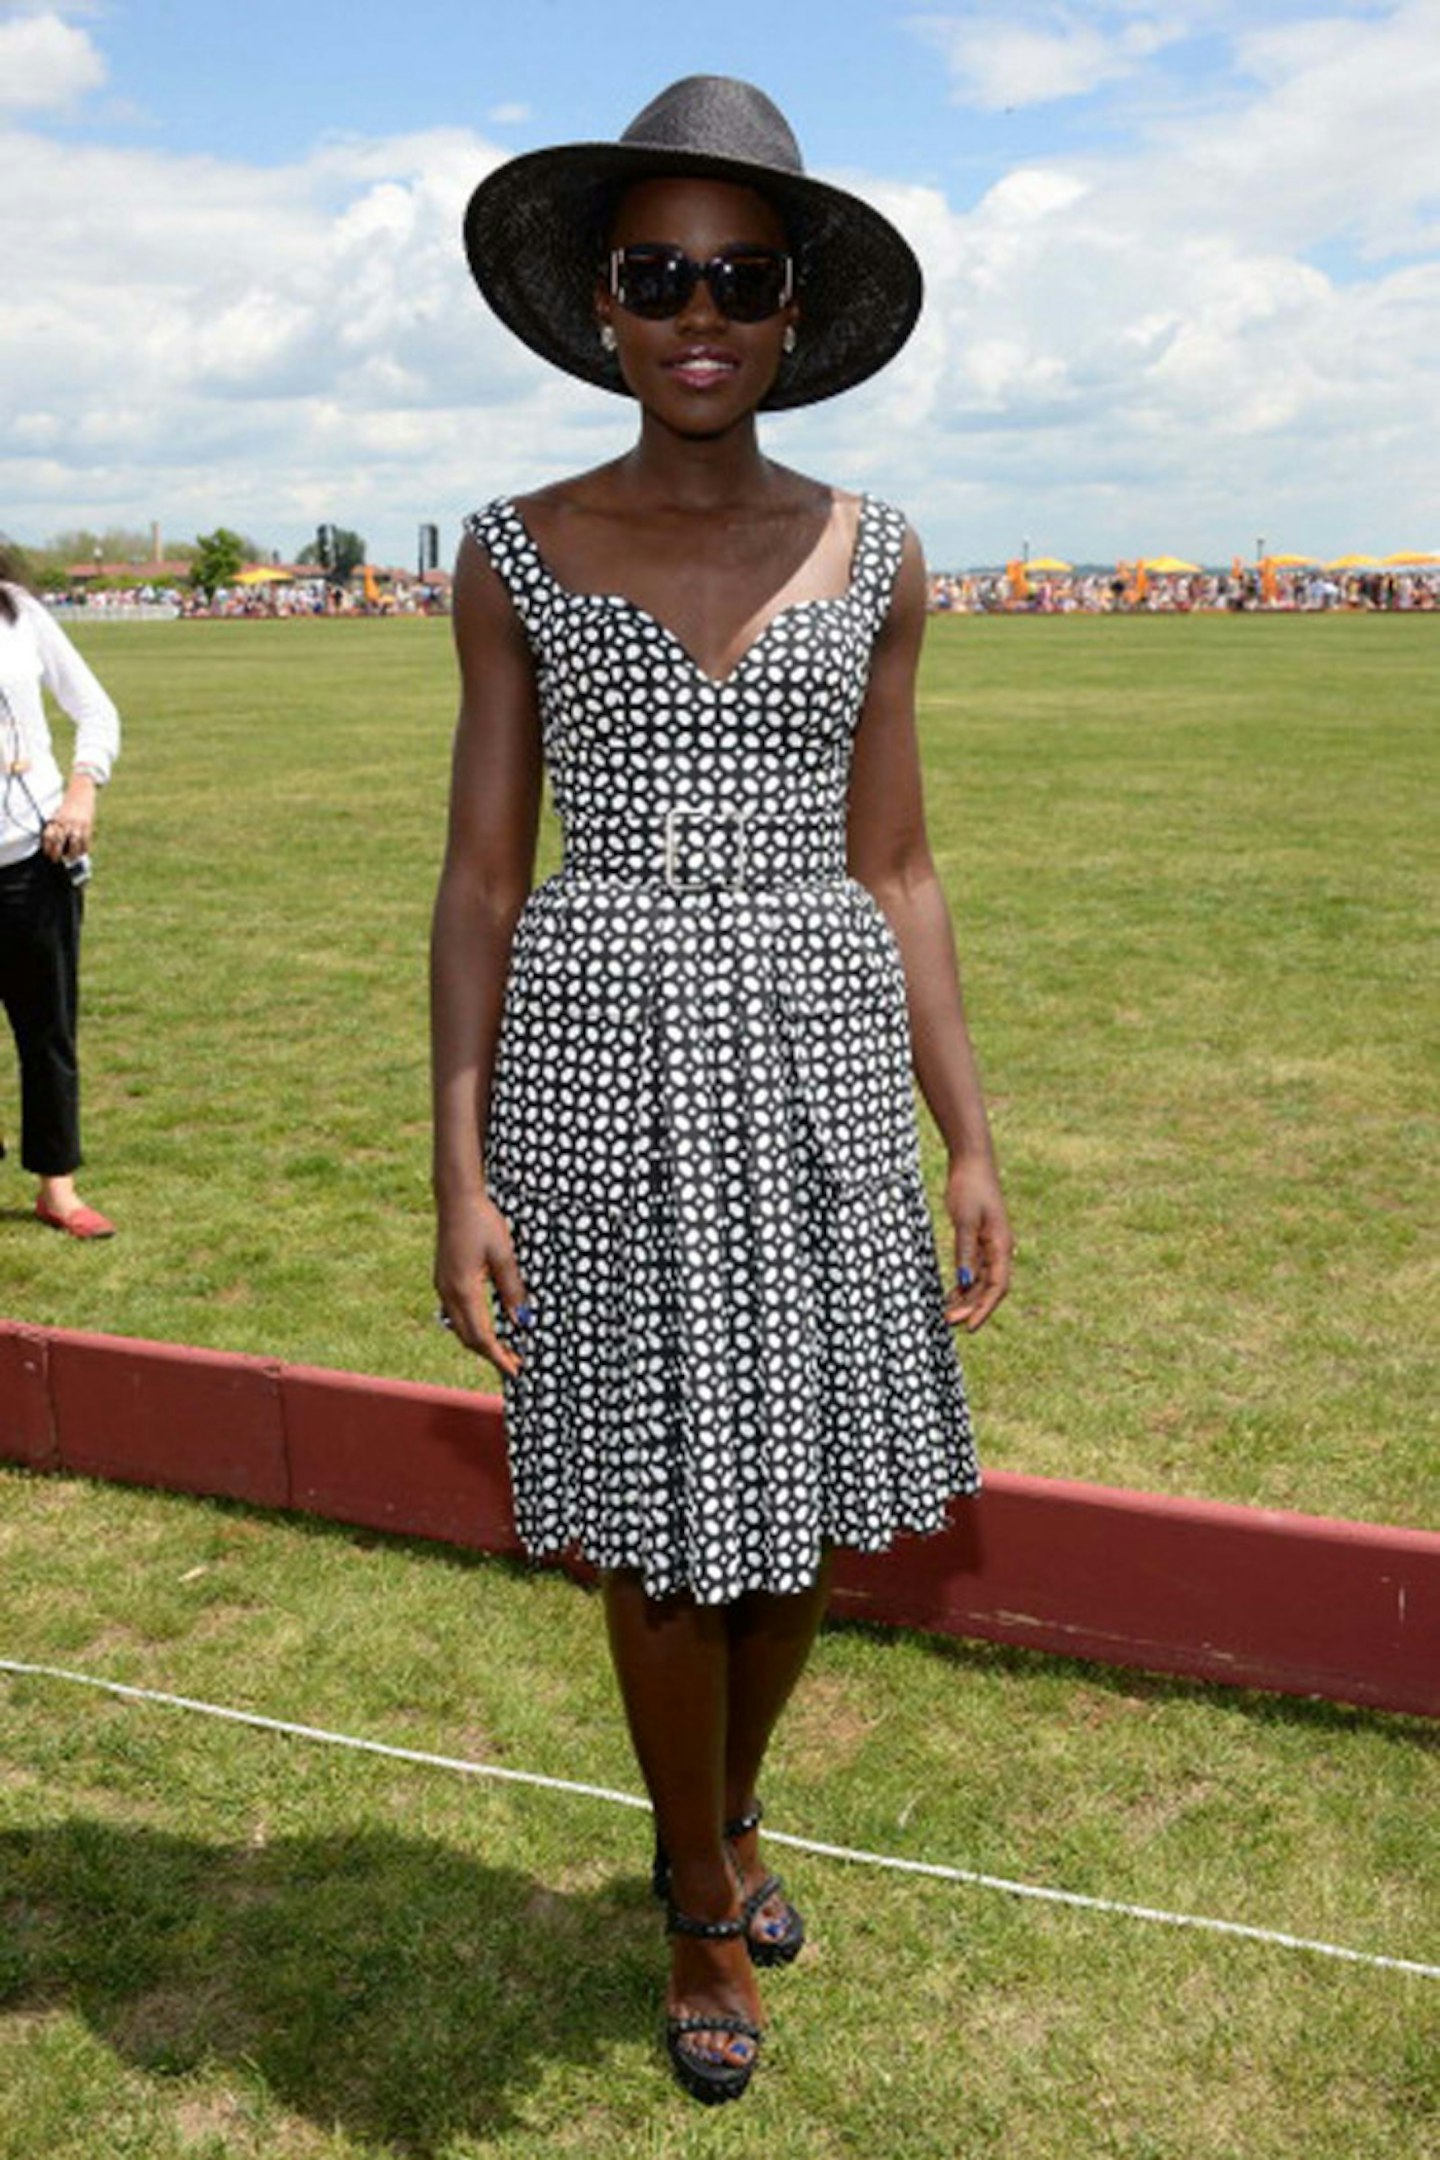 Lupita Nyong'o in Alexander McQueen at the Veuve Clicquot Polo Classic